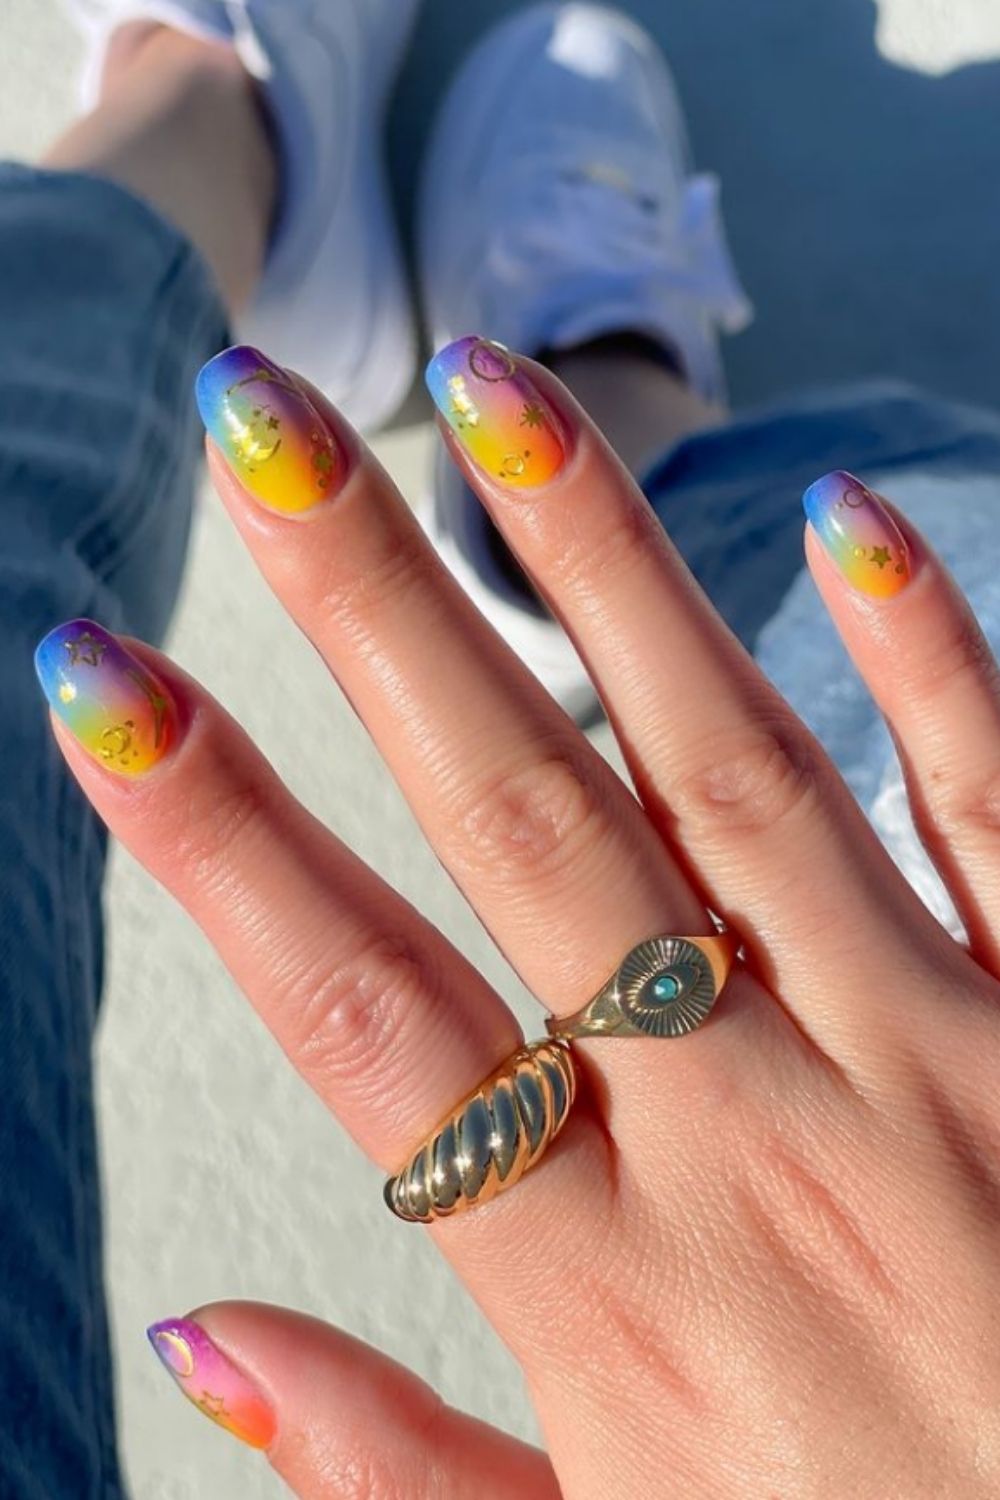 Hottest Tie Dye Nails to Fit Your Beach Look This Summer